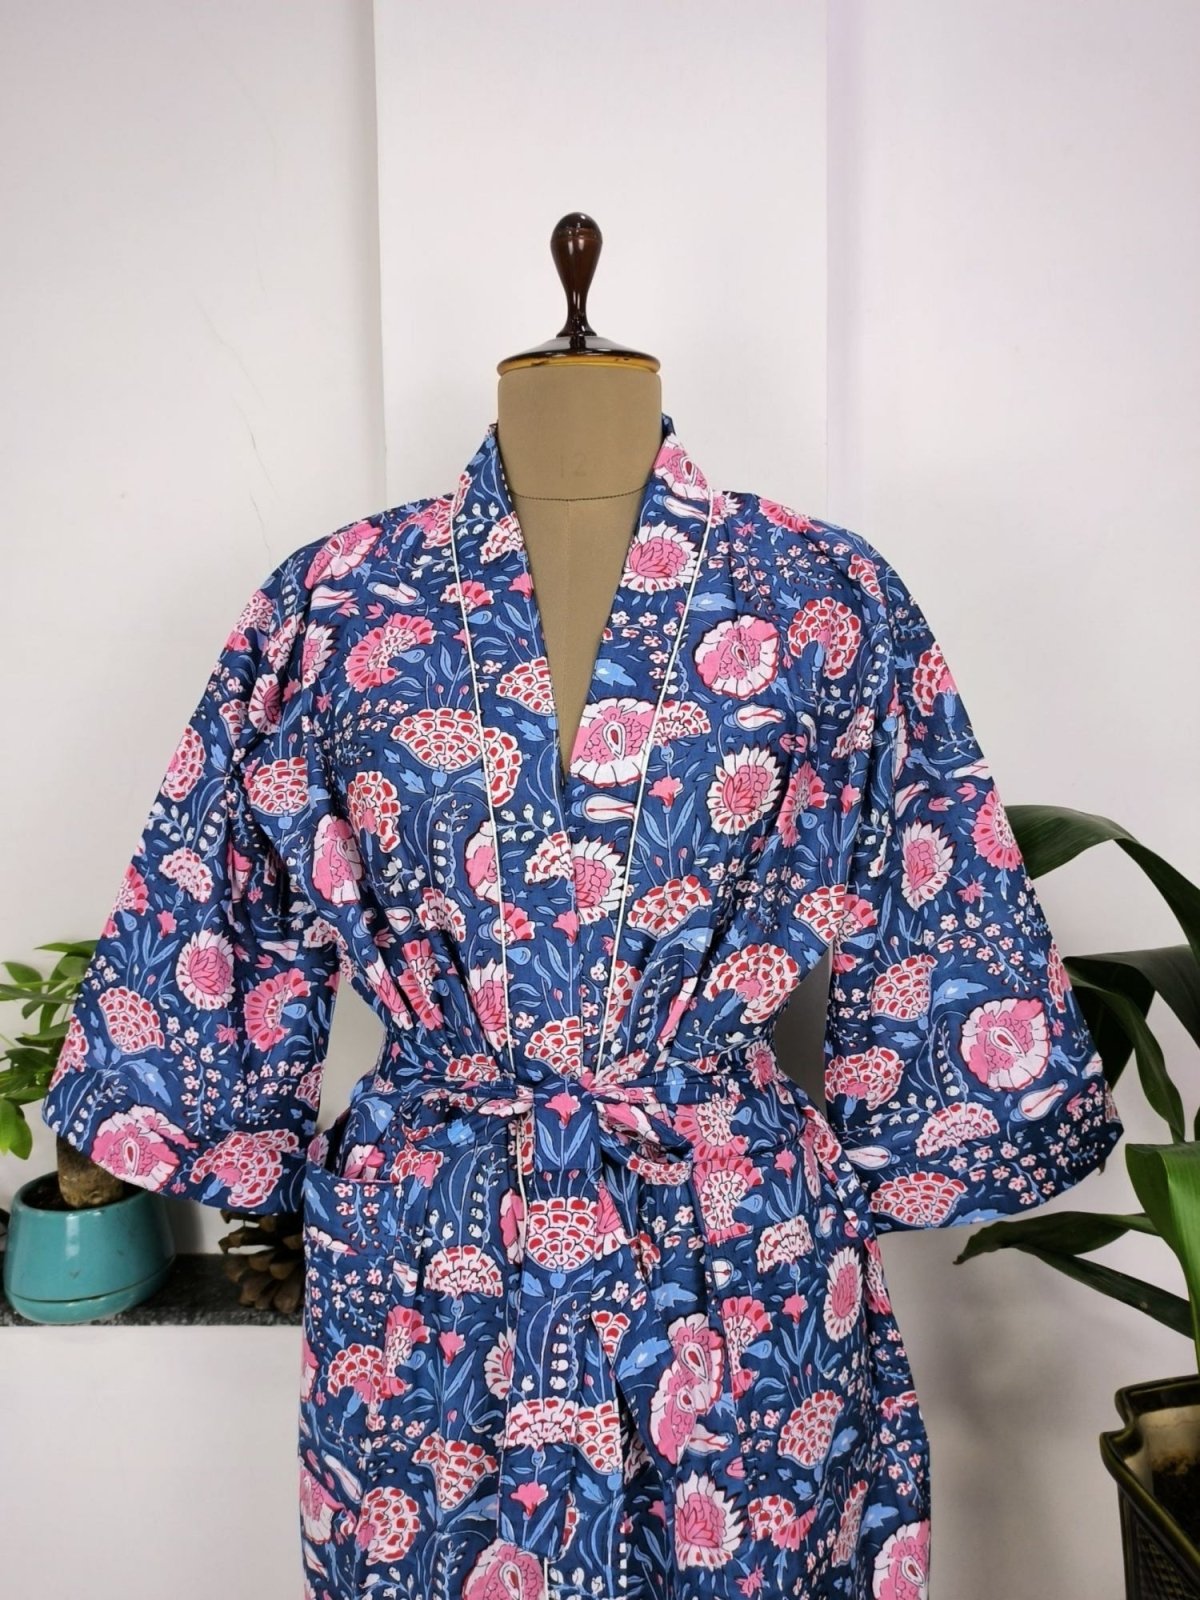 House Robe Summer Kimono Pure Cotton Indian Block Printed For Her | Anniversary Gift Beach Coverup/Comfy Maternity Mom | Blue Pink Florals - The Eastern Loom